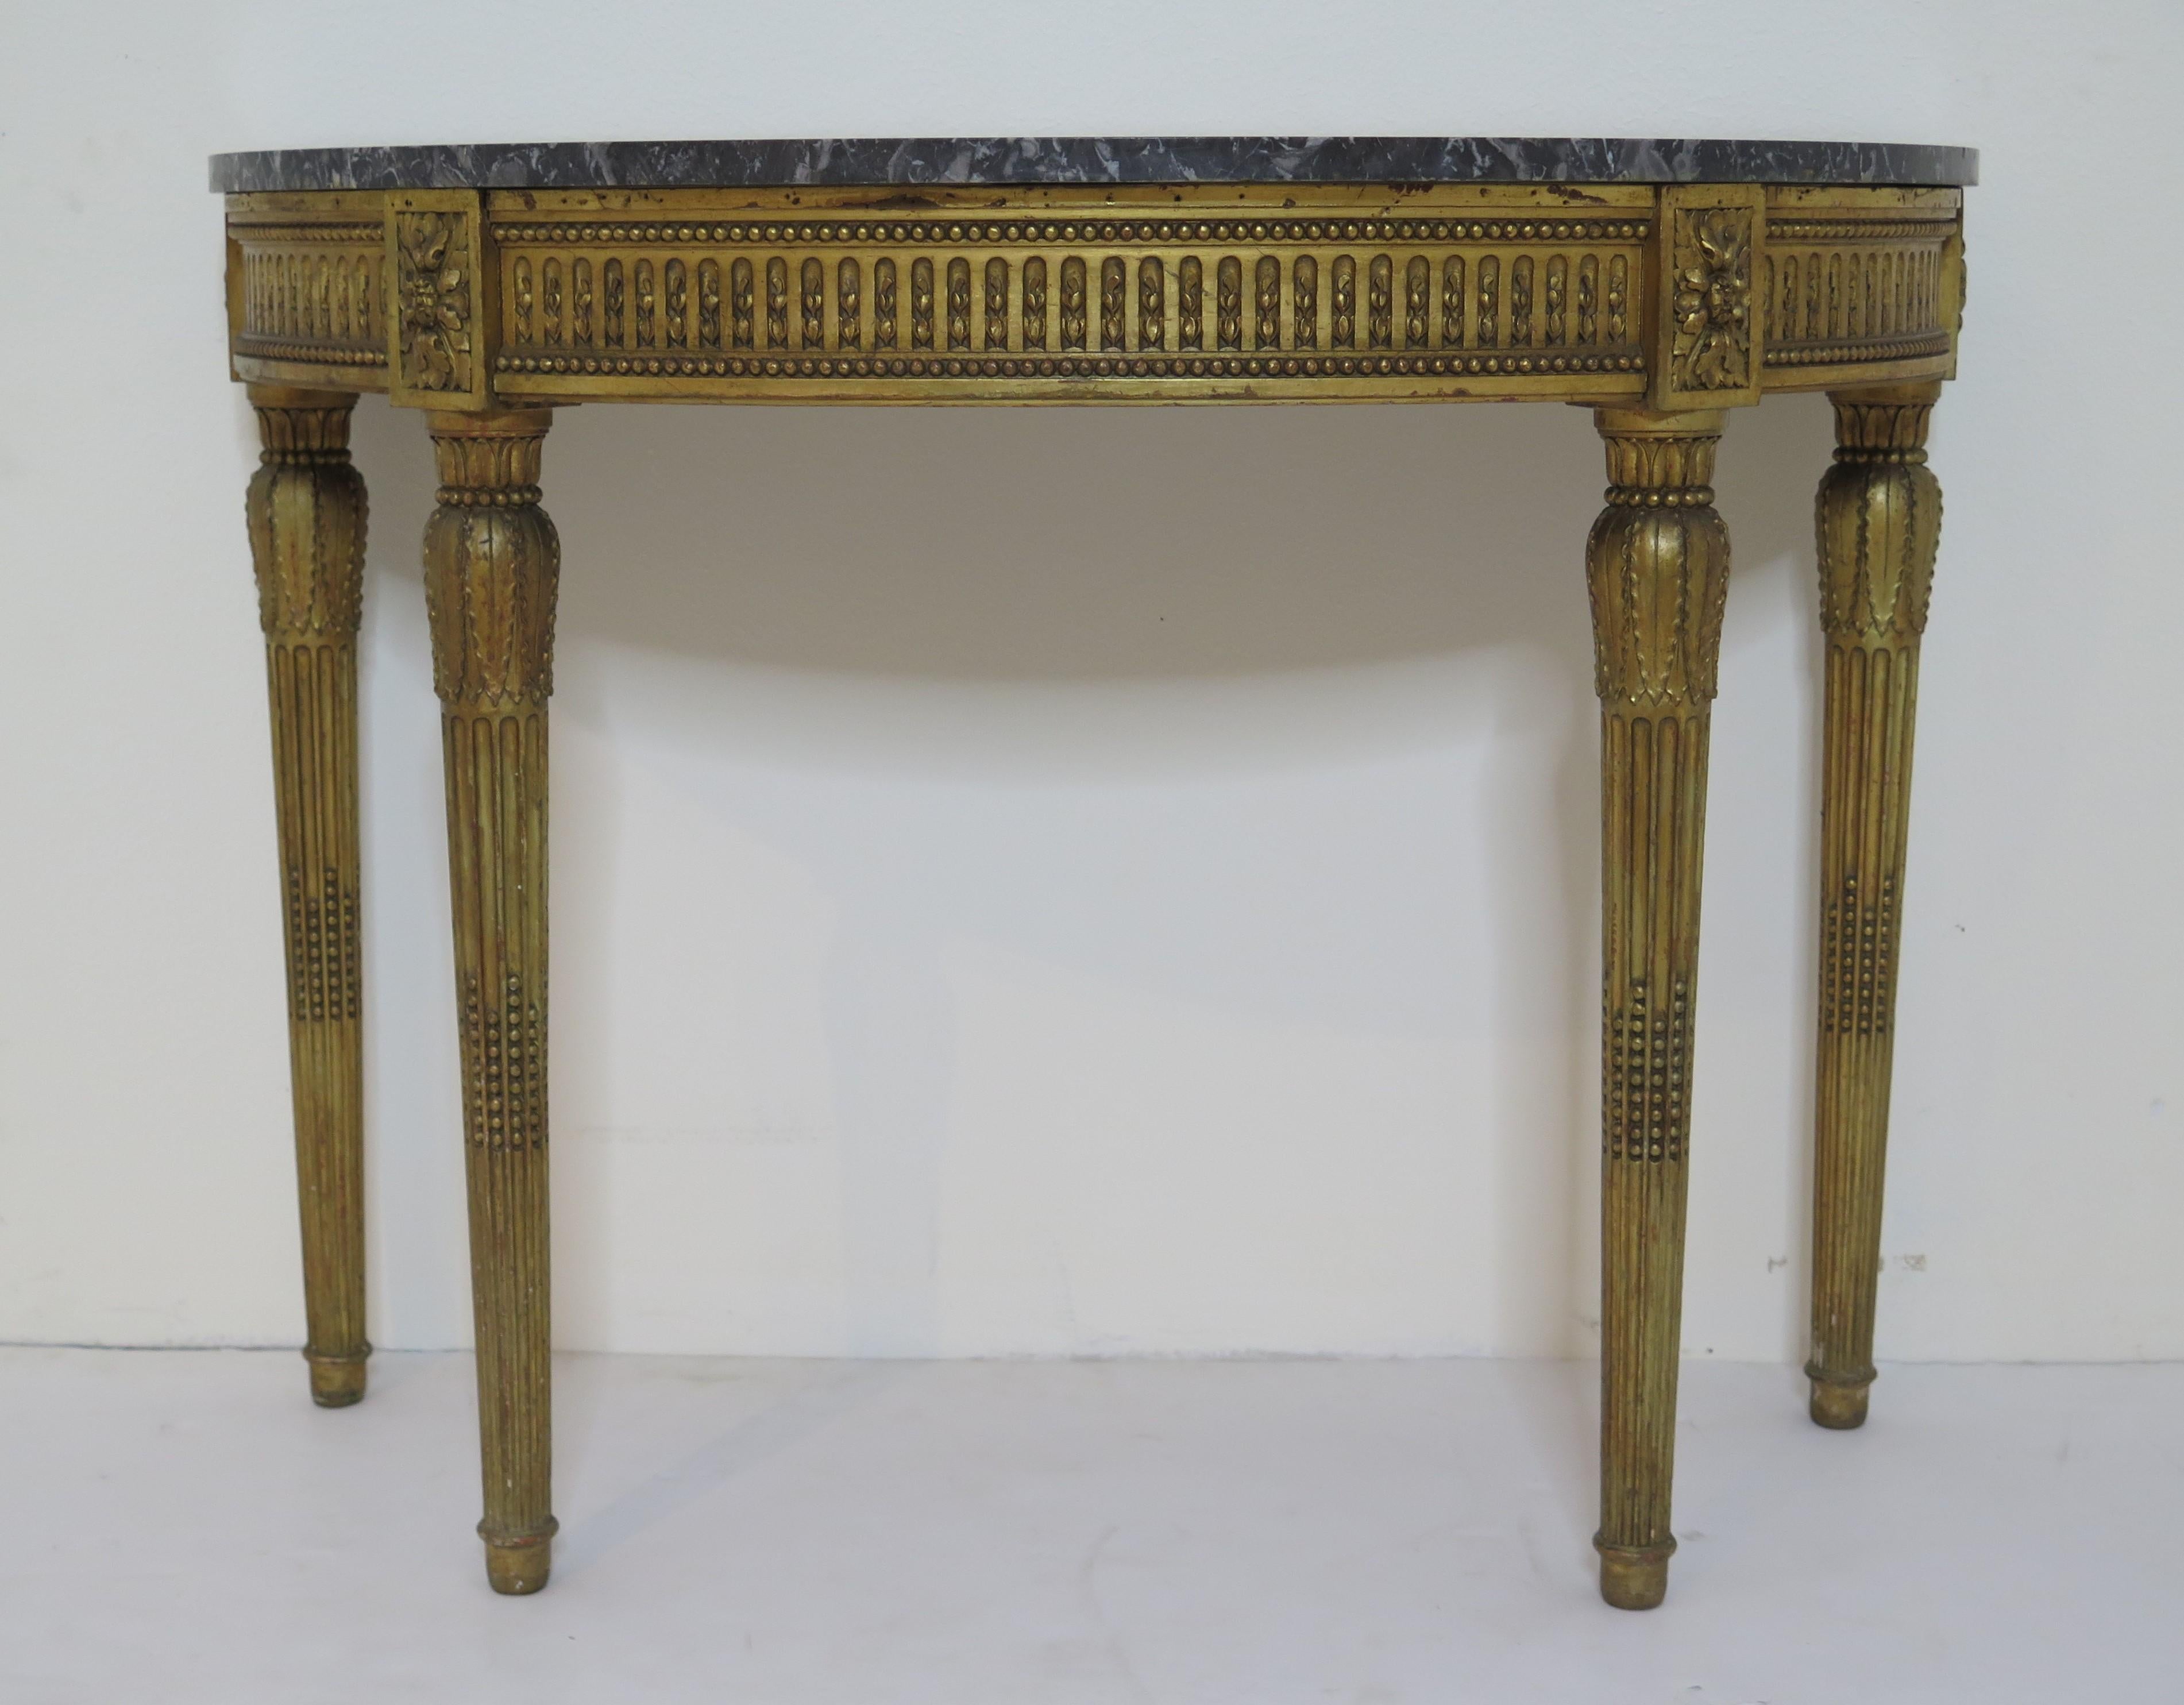 A Louis XVI style demilune console table with grey and white marble top. Ball and tooth finished apron with flower blocks. Leaf designed capitals above tapered and fluted legs. Excellently carved and decorated.